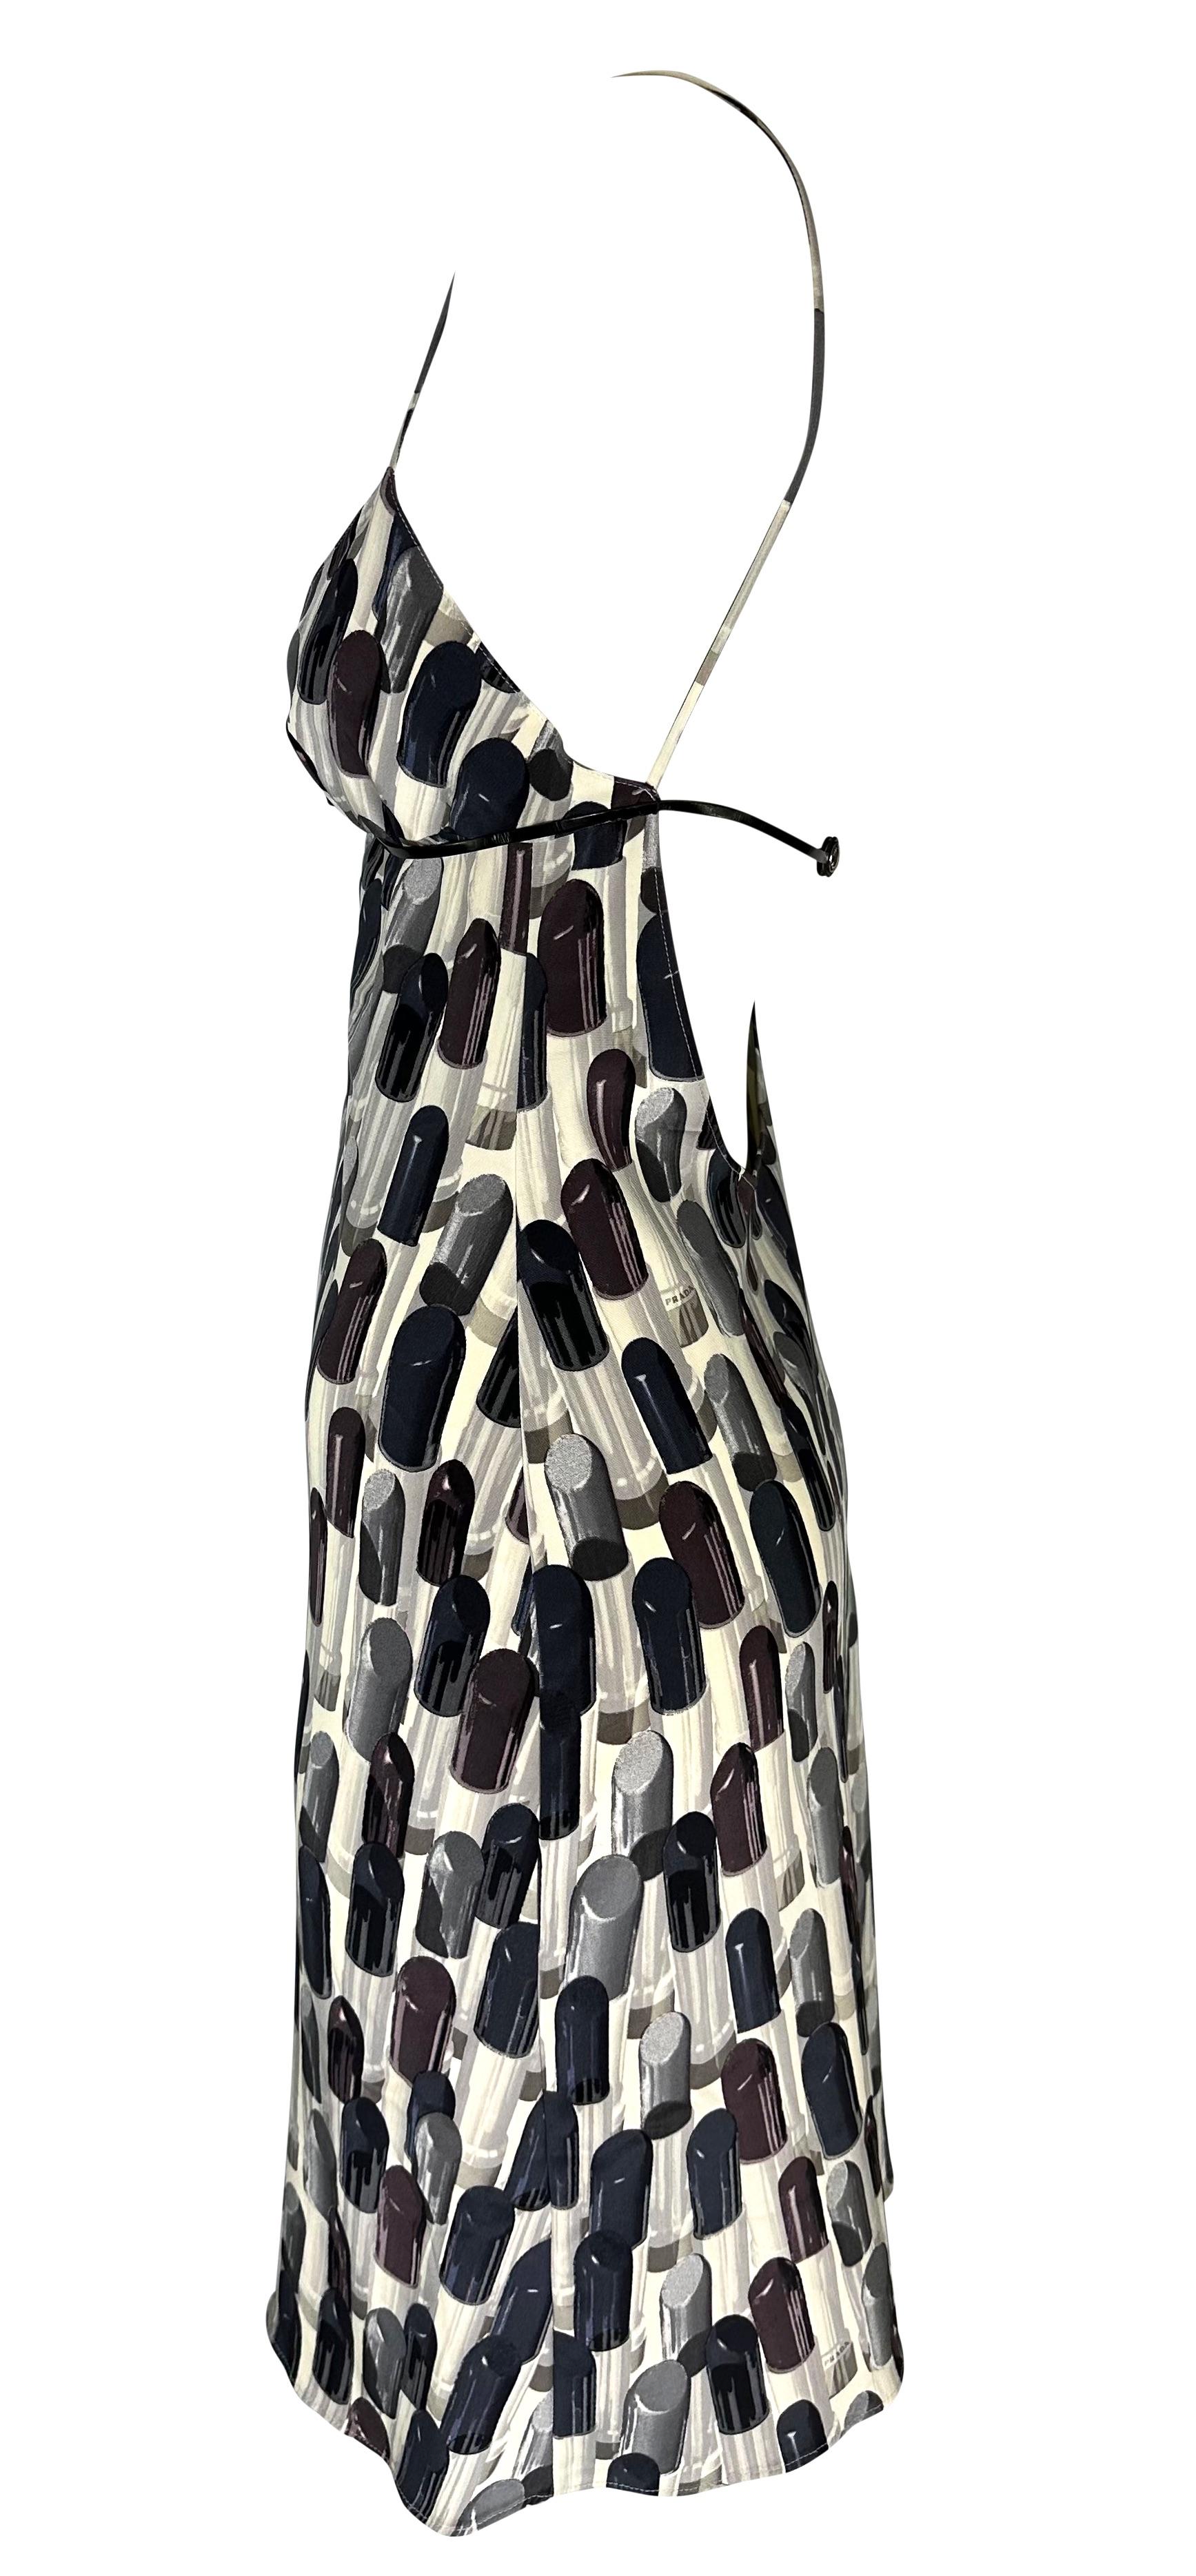 S/S 2000 Prada Lipstick Print Patent Leather Belted Mini Cocktail Dress In Fair Condition In West Hollywood, CA